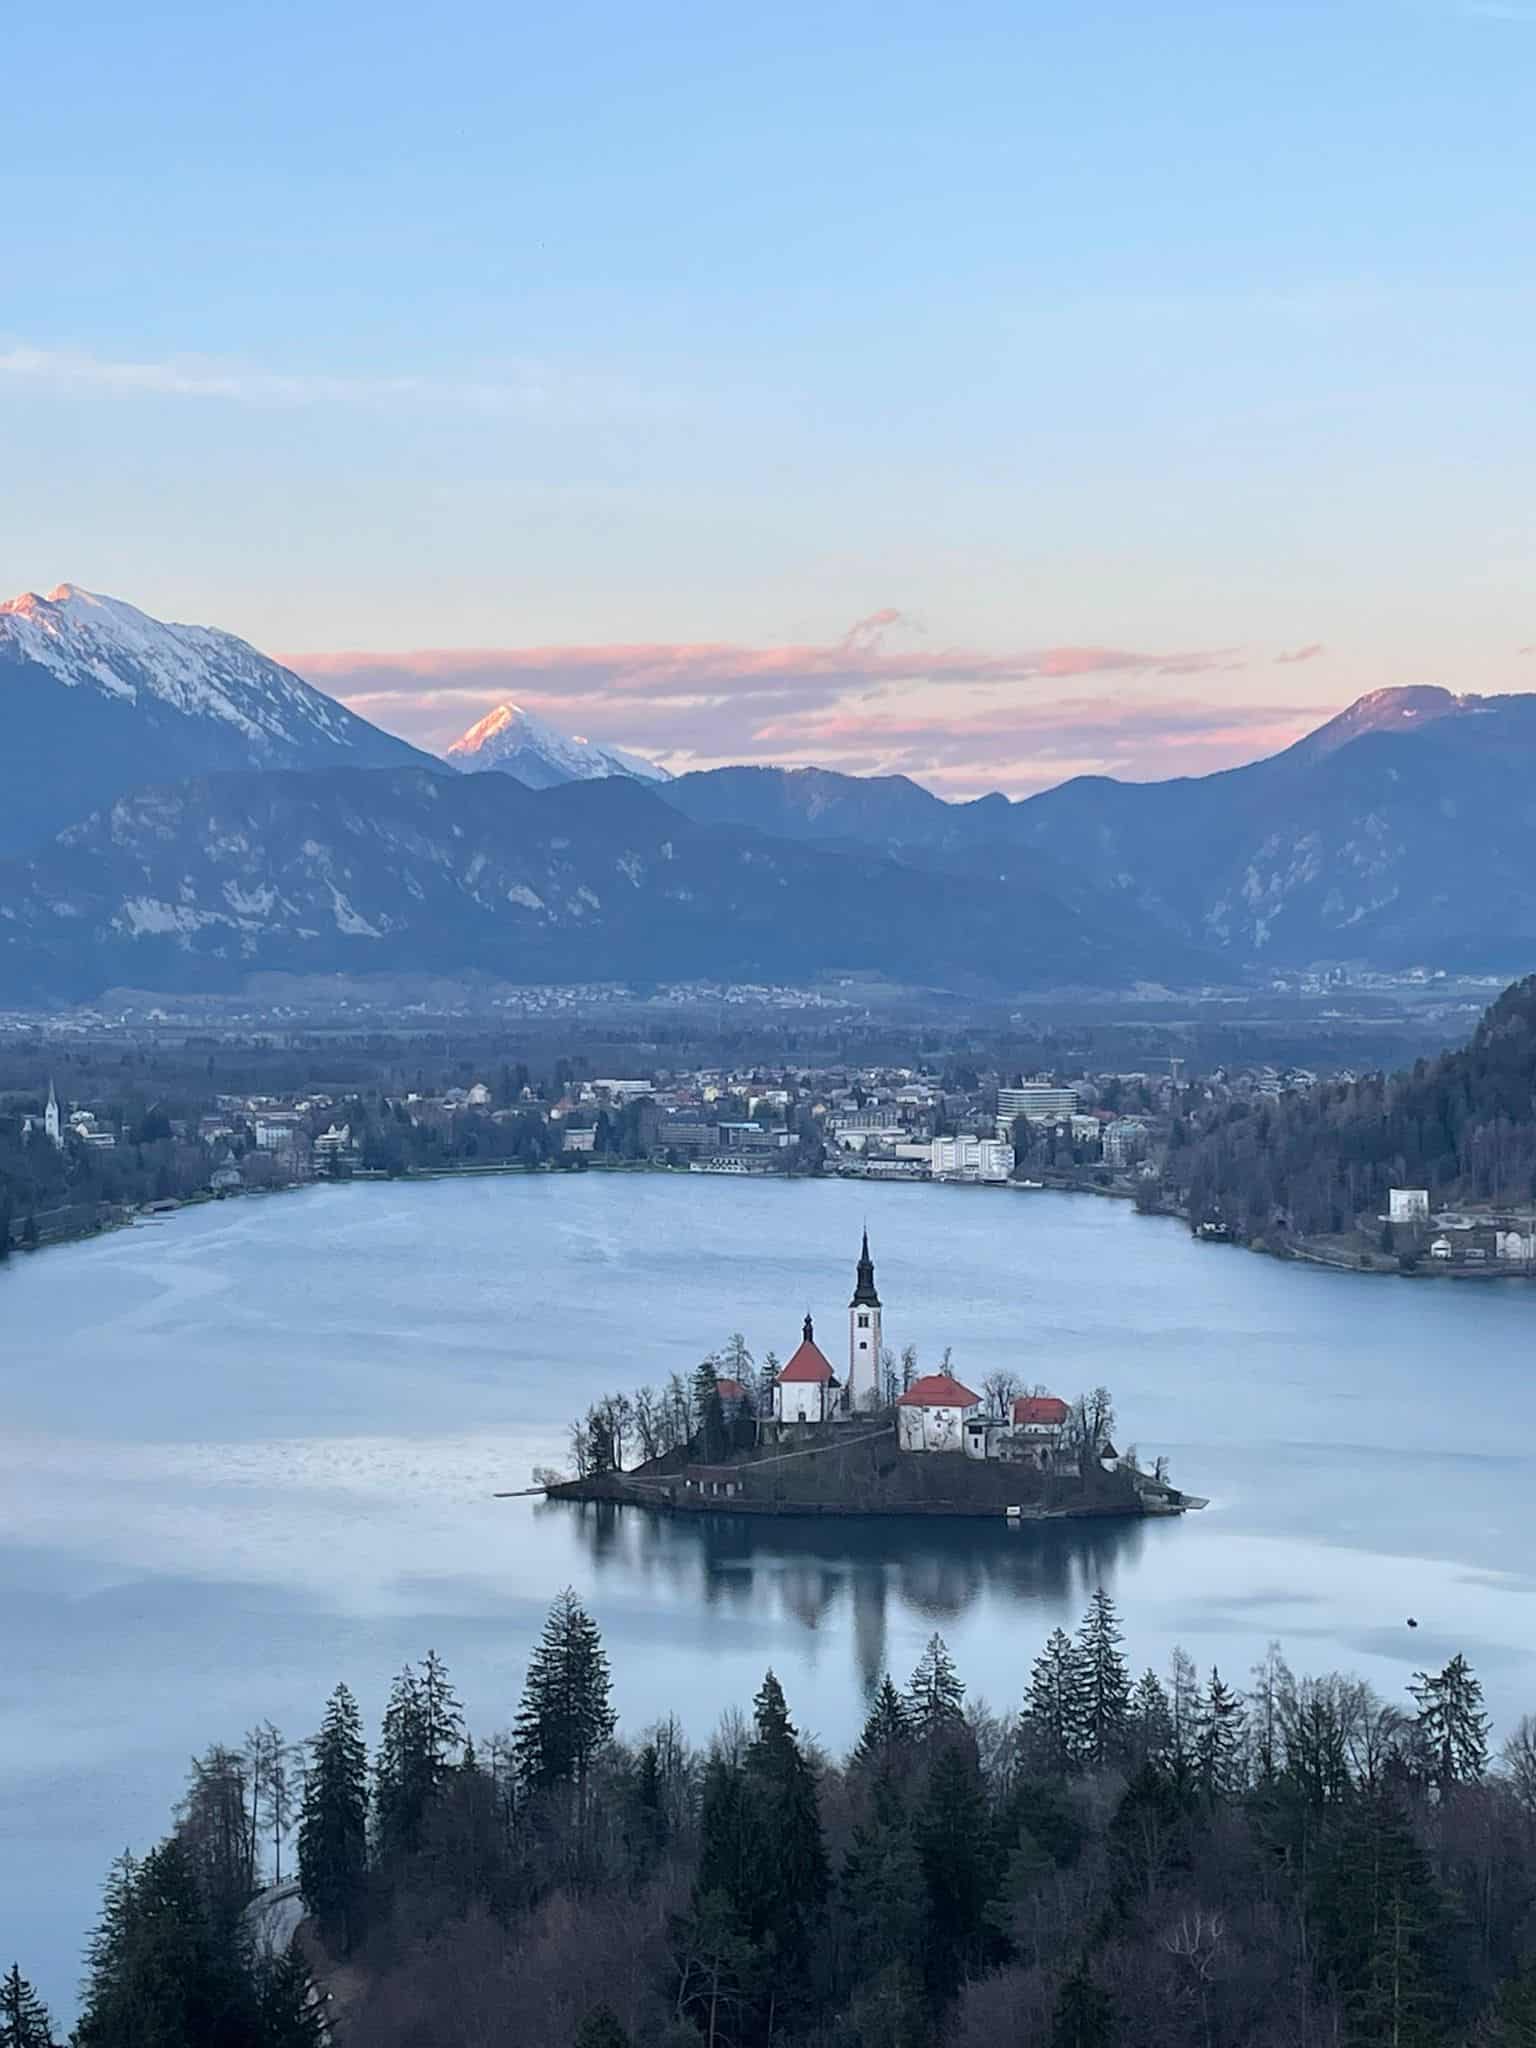 Bled Island standing in the middle of Lake Bled, Slovenia. The lake surrounds the island as the sun sets in the background behind snow-capped mountains.